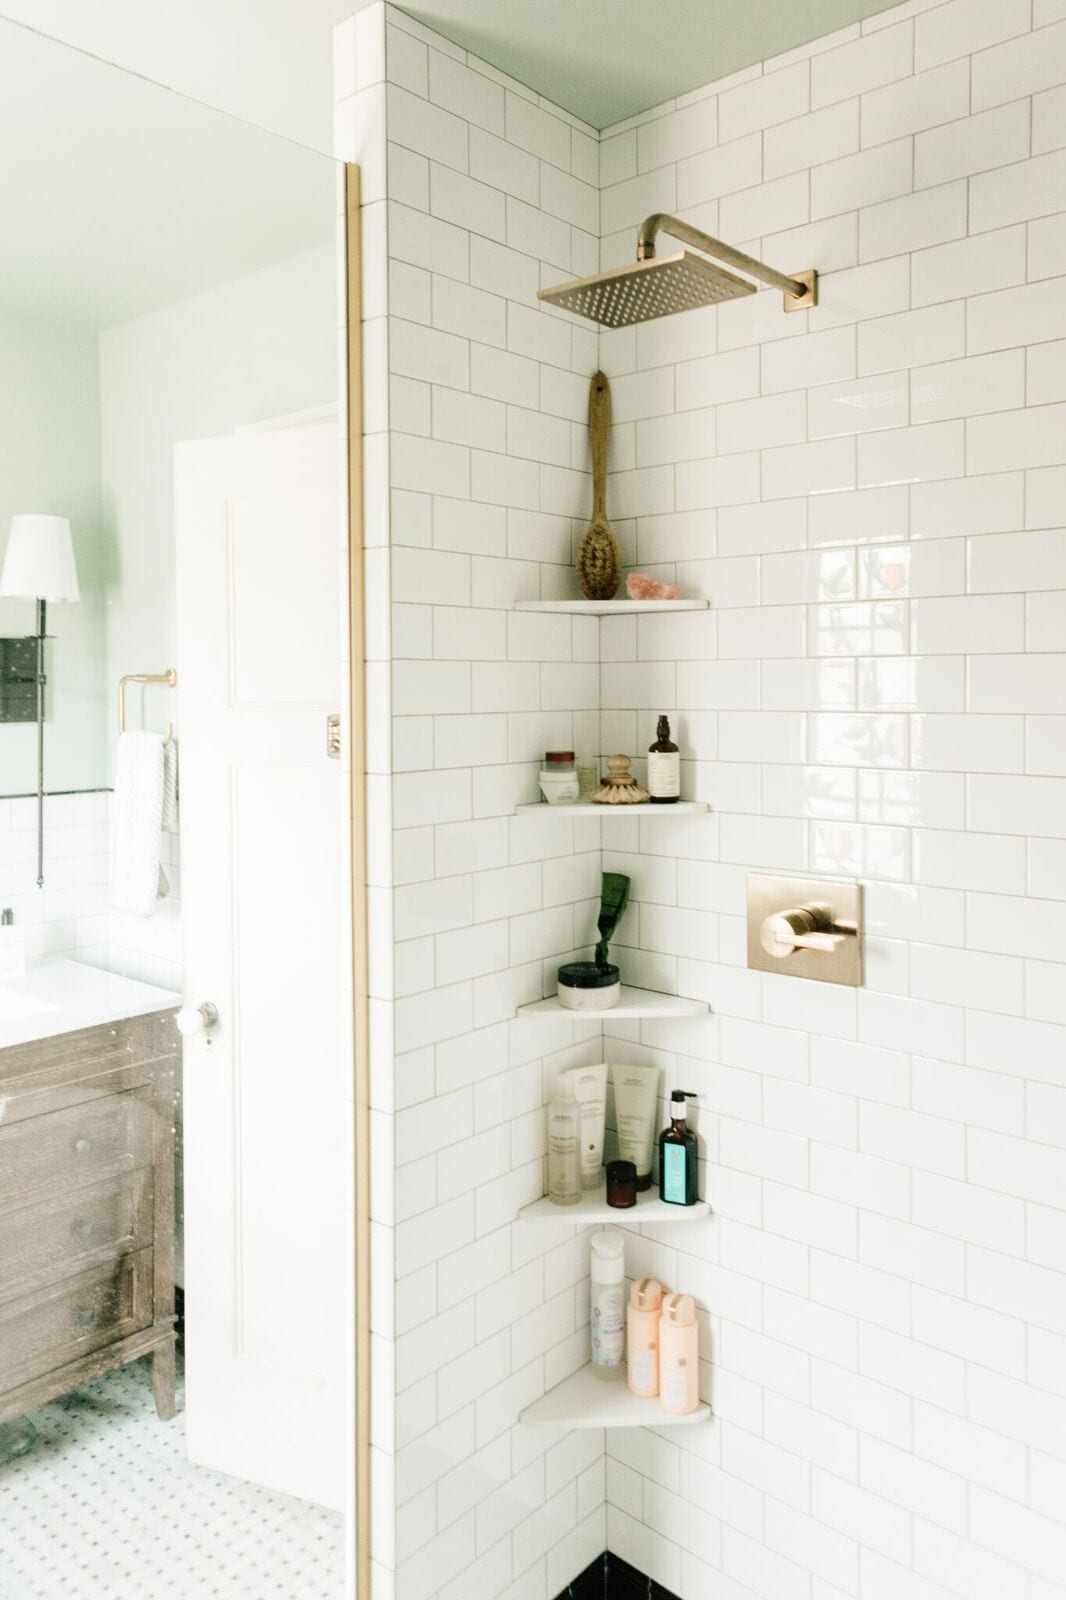 Our Bathroom Makeover Story (Including Before & After Photos) | Wit & Delight